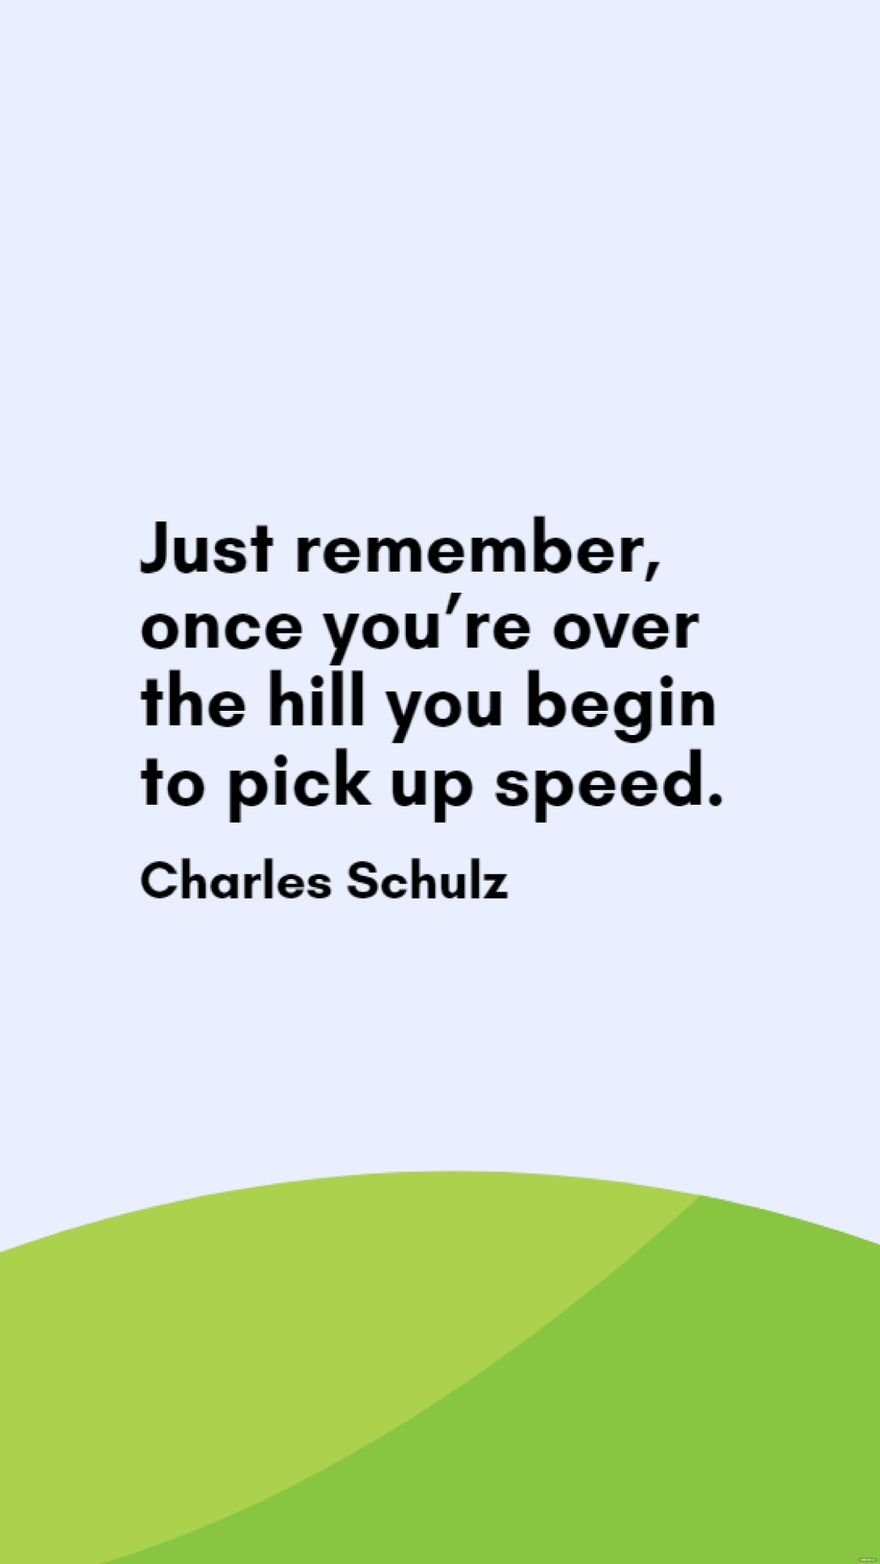 Charles Schulz - Just remember, once you’re over the hill you begin to pick up speed.